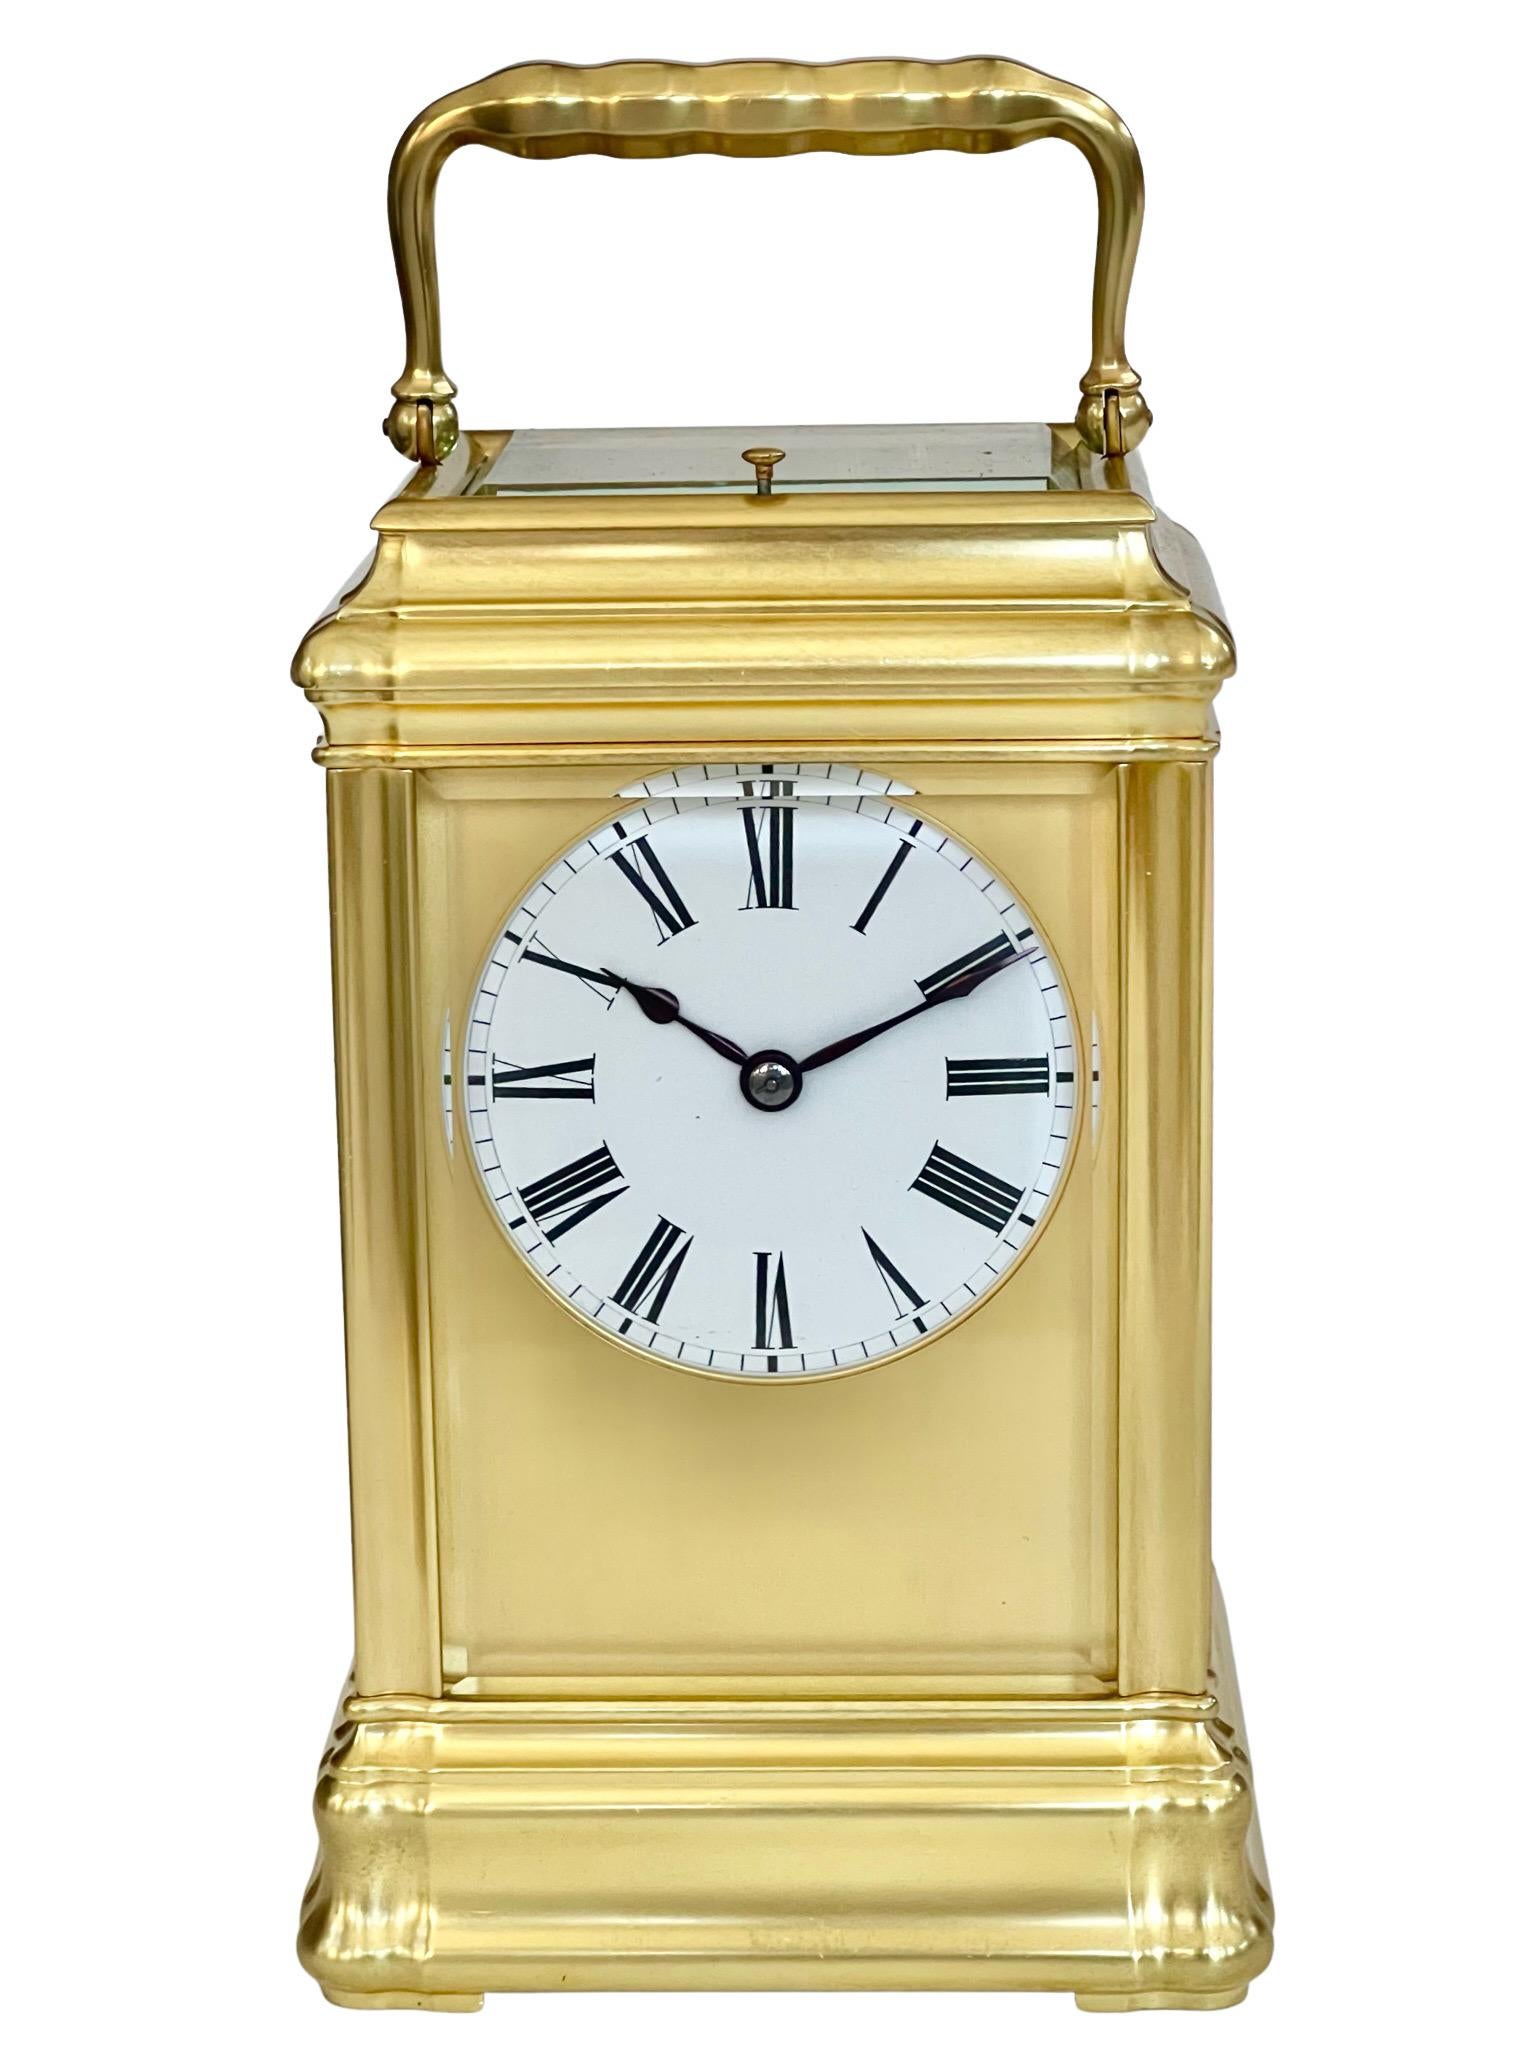 A magnificent French giant eight day striking and repeating carriage clock by Drocourt, Paris. This is an outstanding example of a French giant carriage clock that s in excellent cosmetic and mechanical condition.

The substantial gorge case is